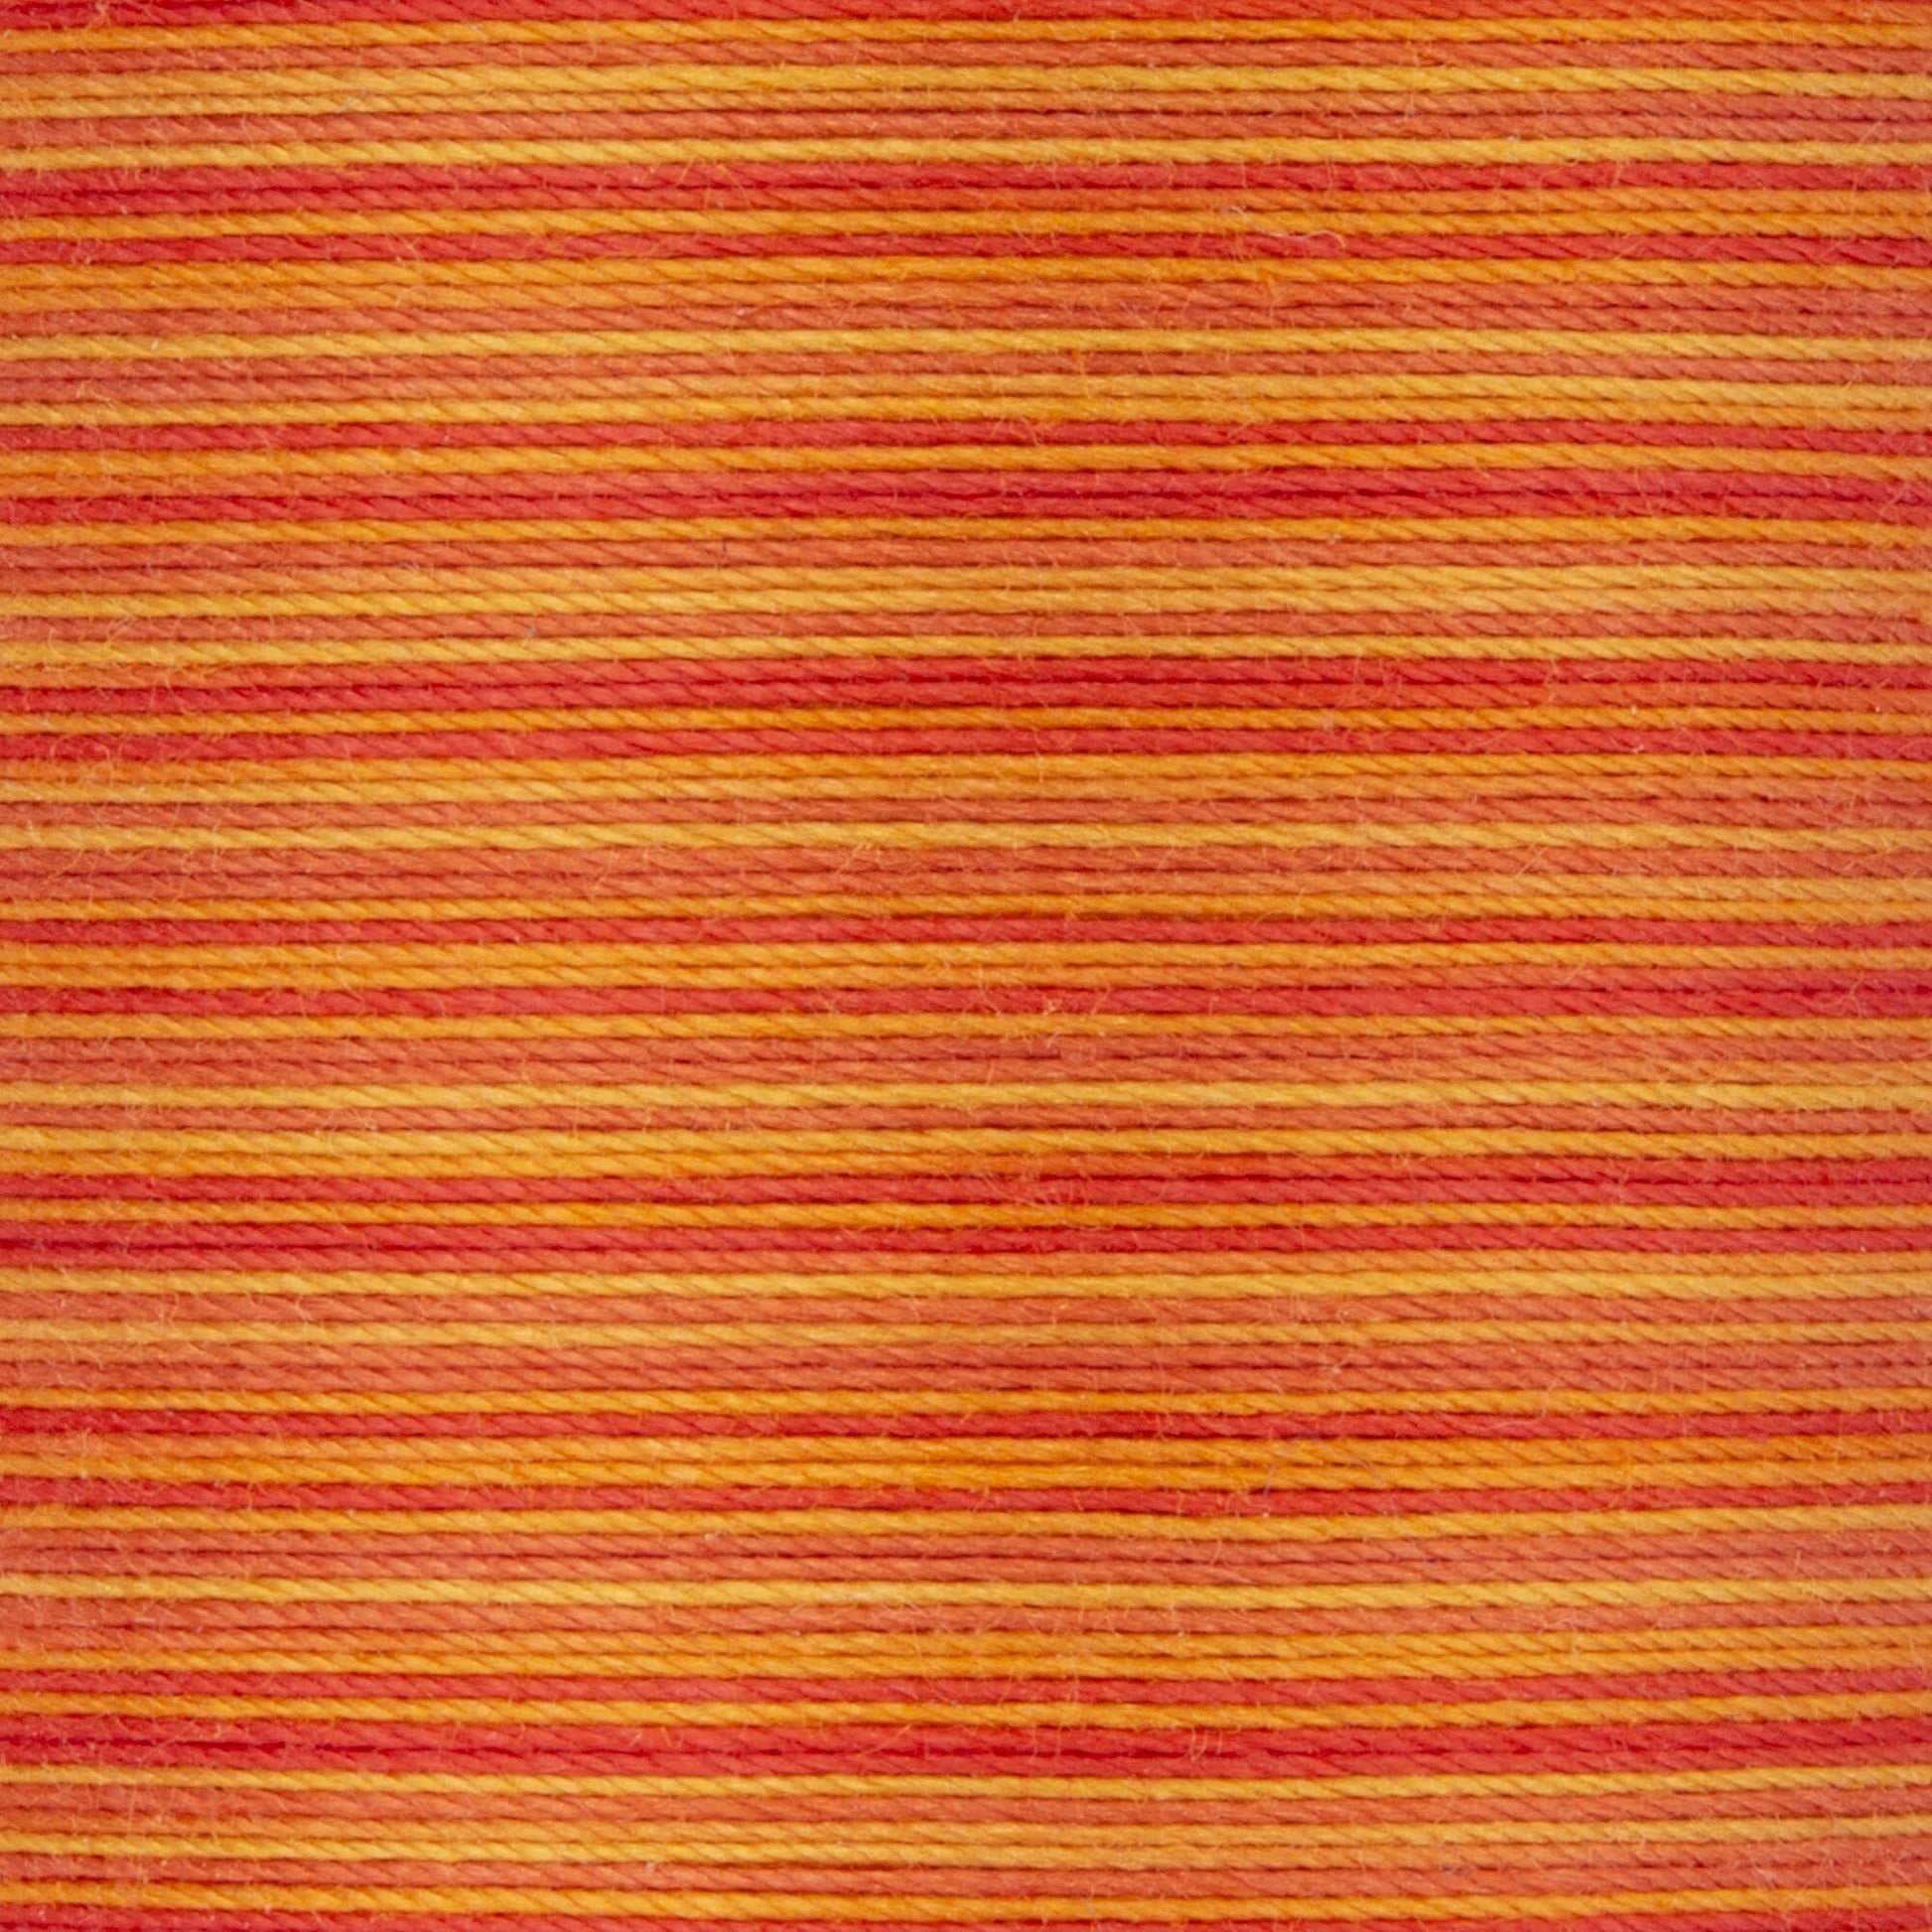 Coats & Clark Cotton Machine Quilting Multicolor Thread (225 Yards) Canyon Sunset